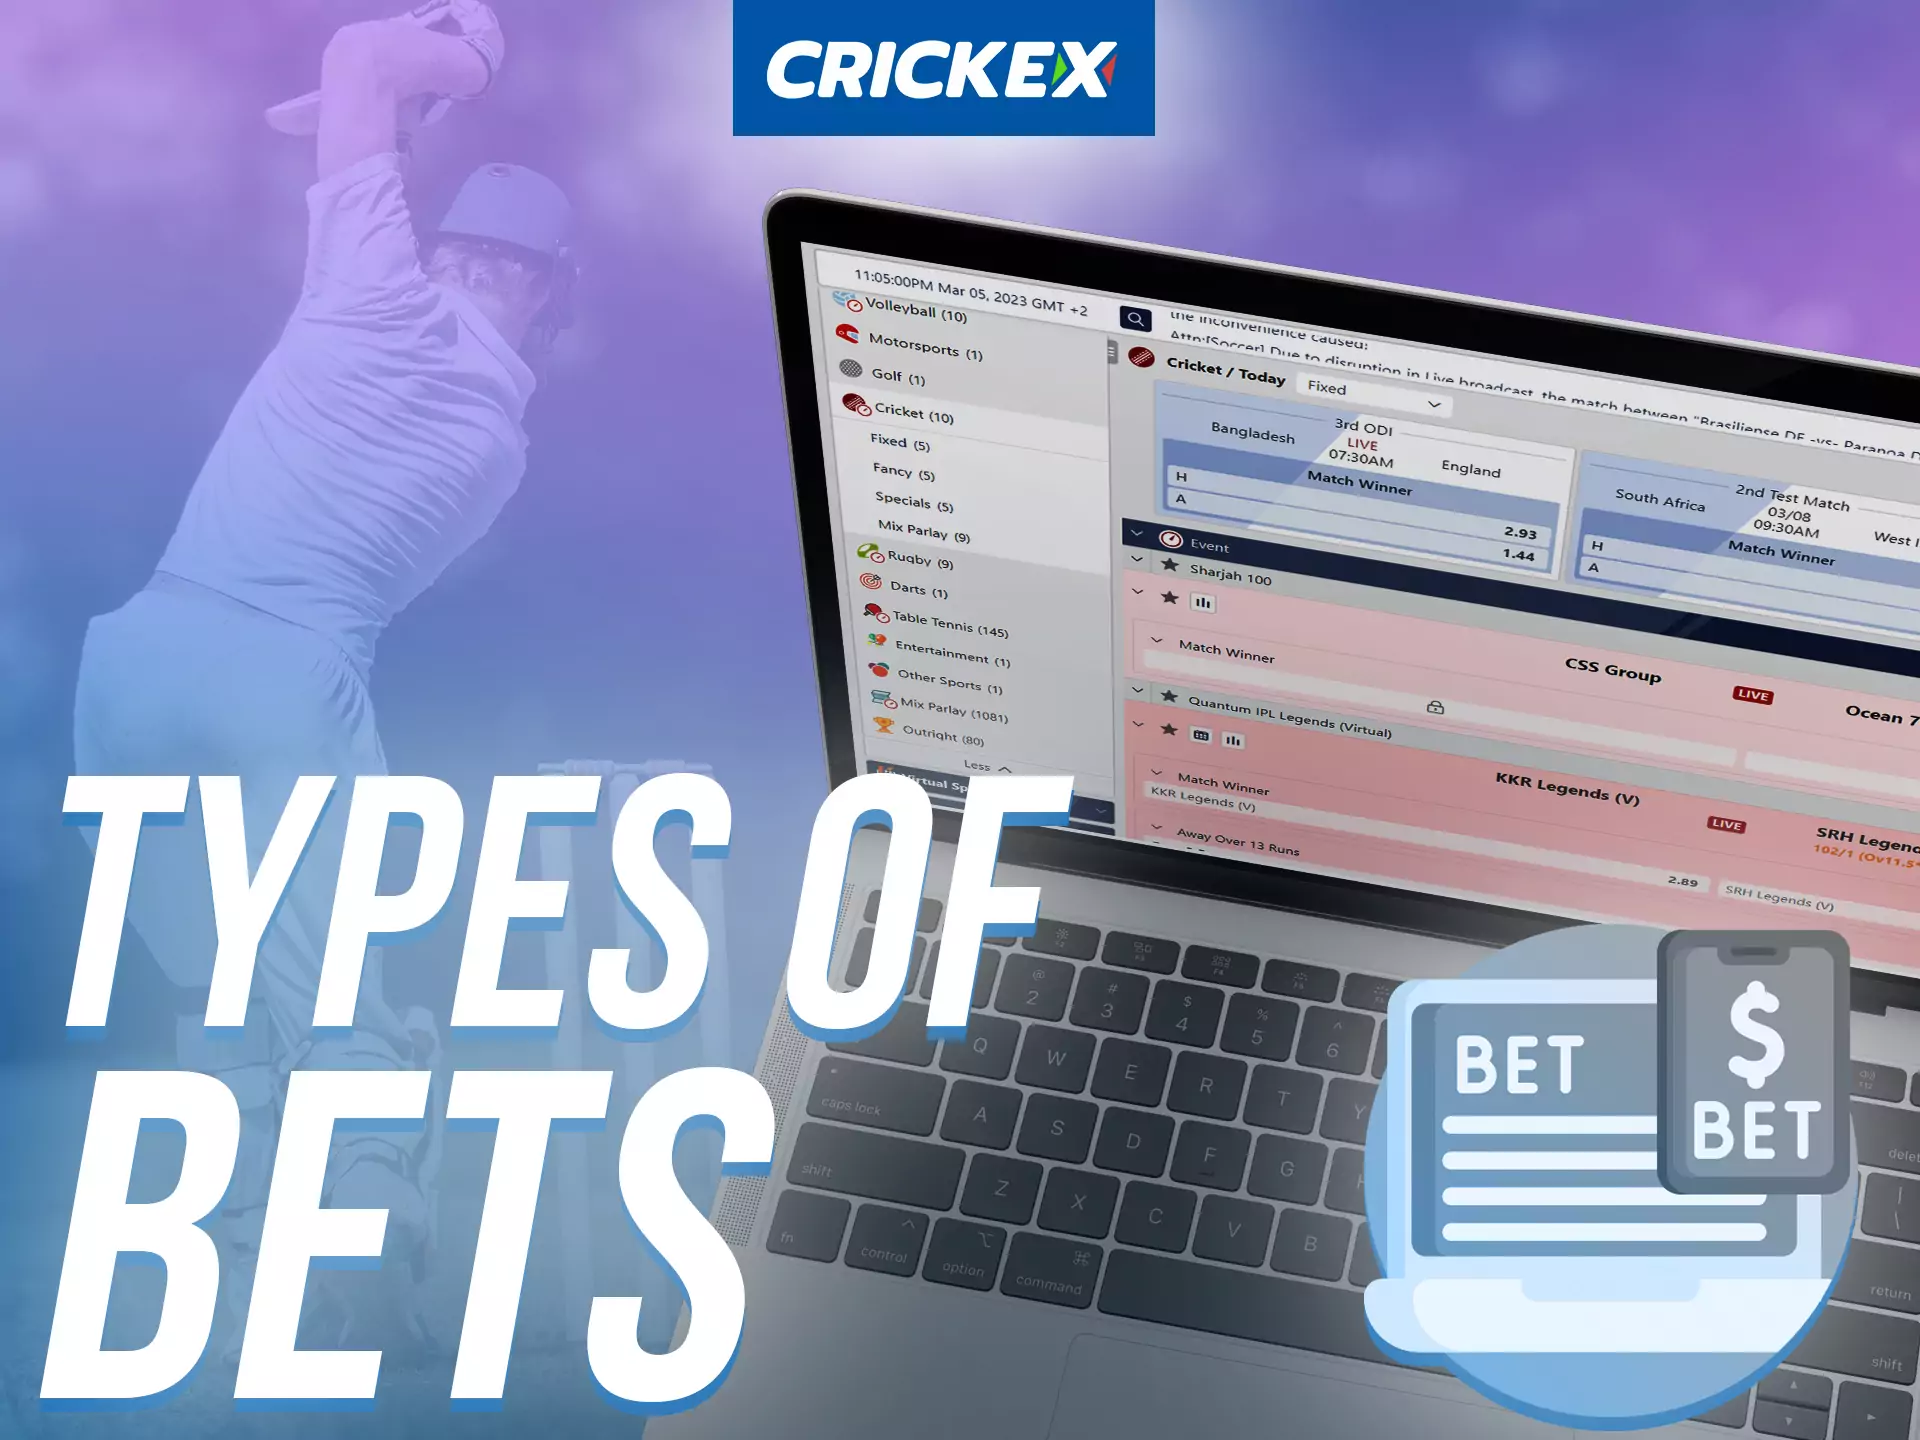 At Crickex betting on sports try different types of bets.